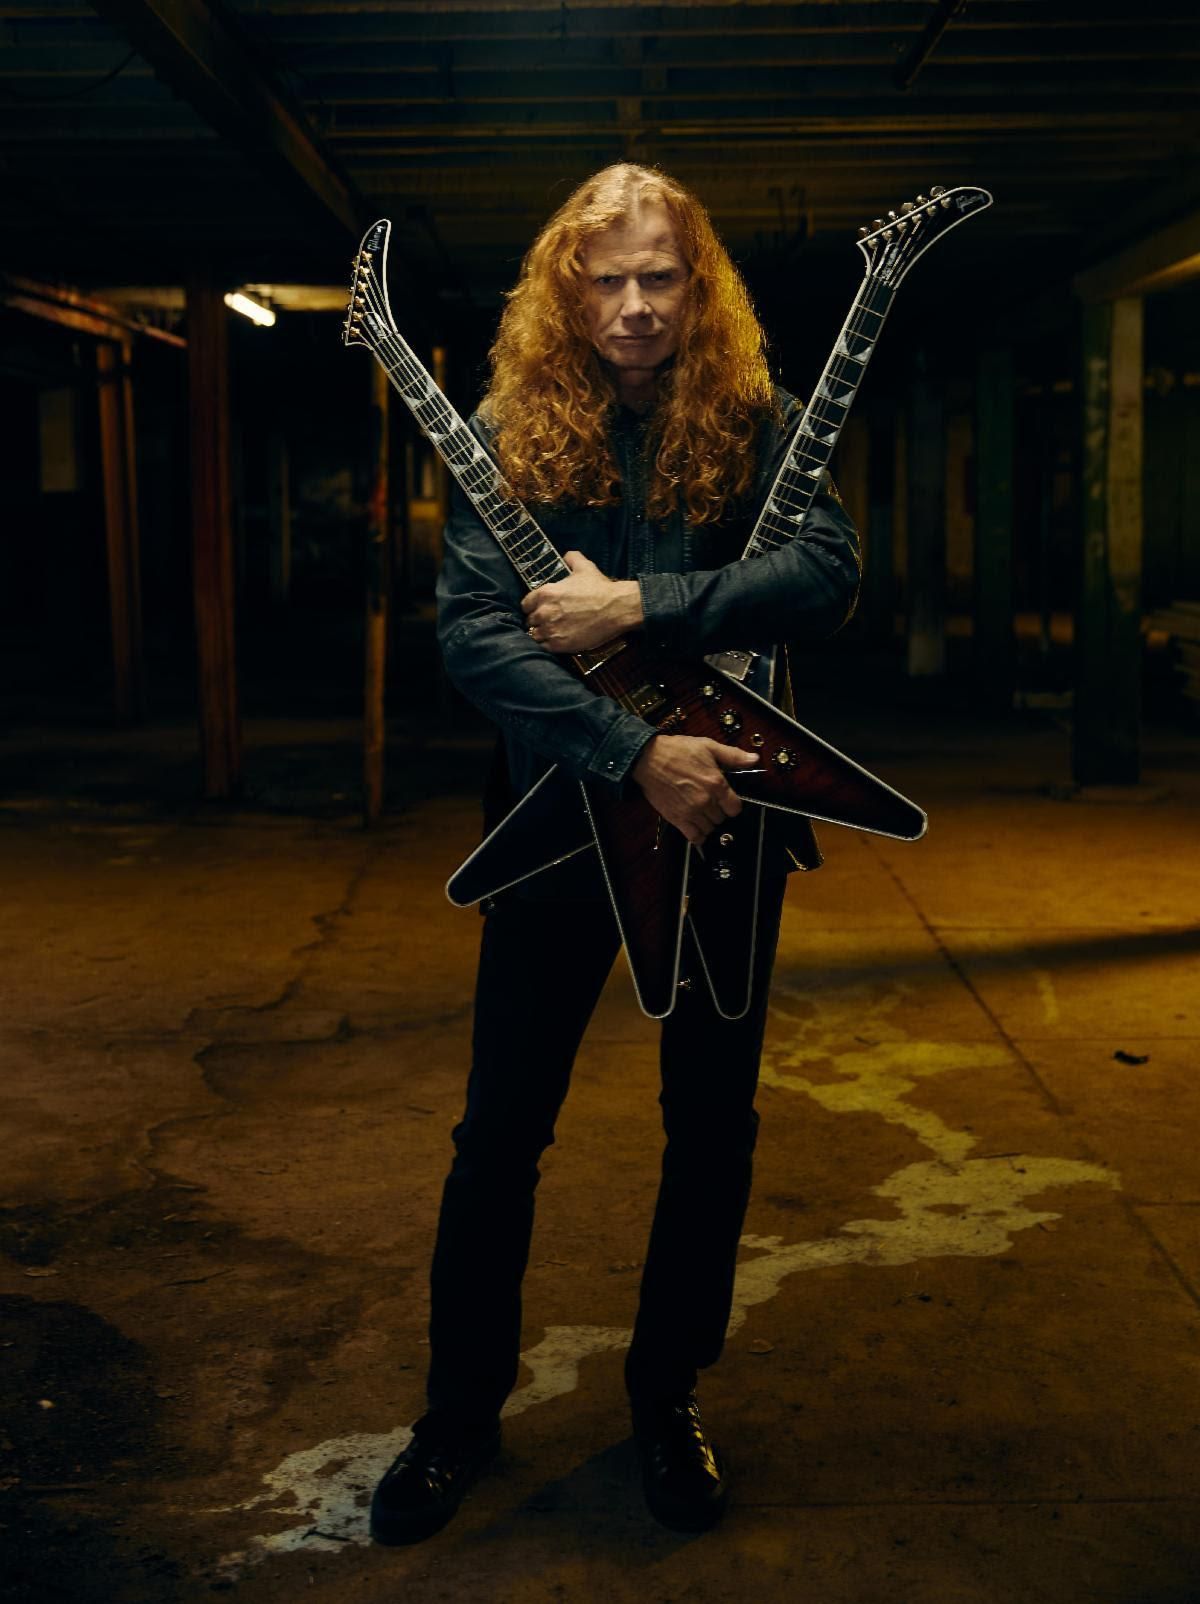 Gibson and Dave Mustaine Add Limited-Edition Flying V EXP to the Dave Mustaine Collection